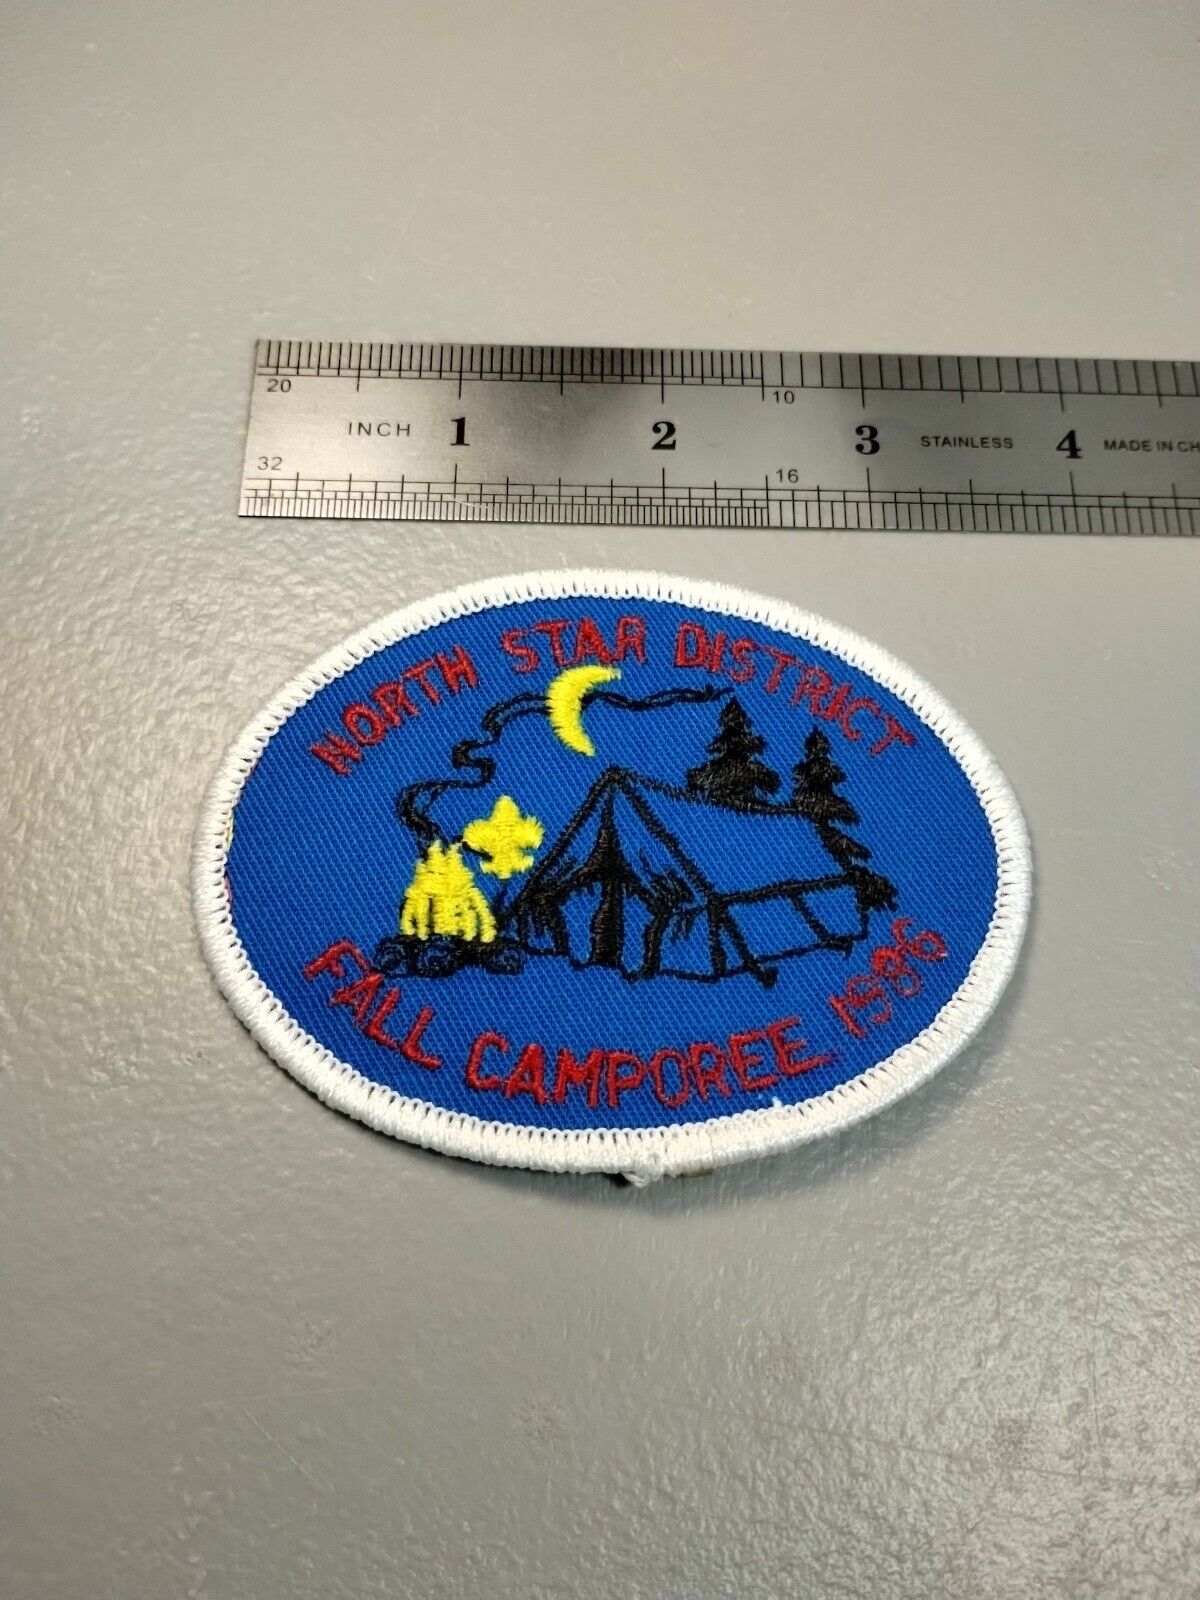 Vintage 1986 North Star District Fall Camporee Boy Scouts Patch VG+ (A3)